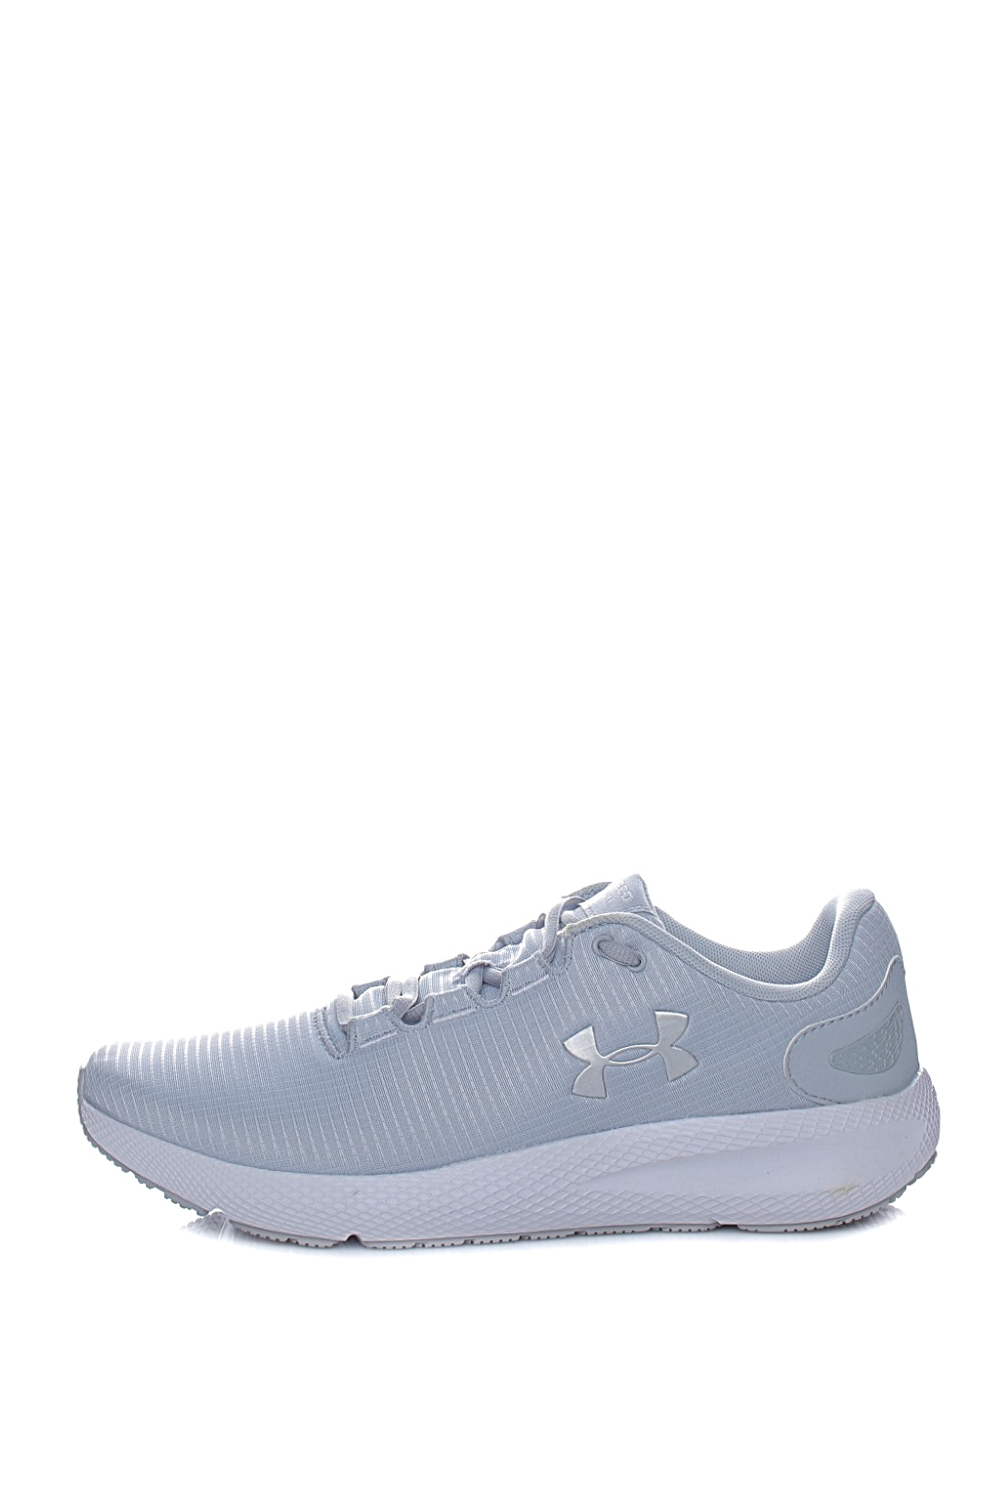 UNDER ARMOUR – Ανδρικά παπούτσια running UNDER ARMOUR Charged Pursuit 2 Rip γκρι 1821801.0-G5G5